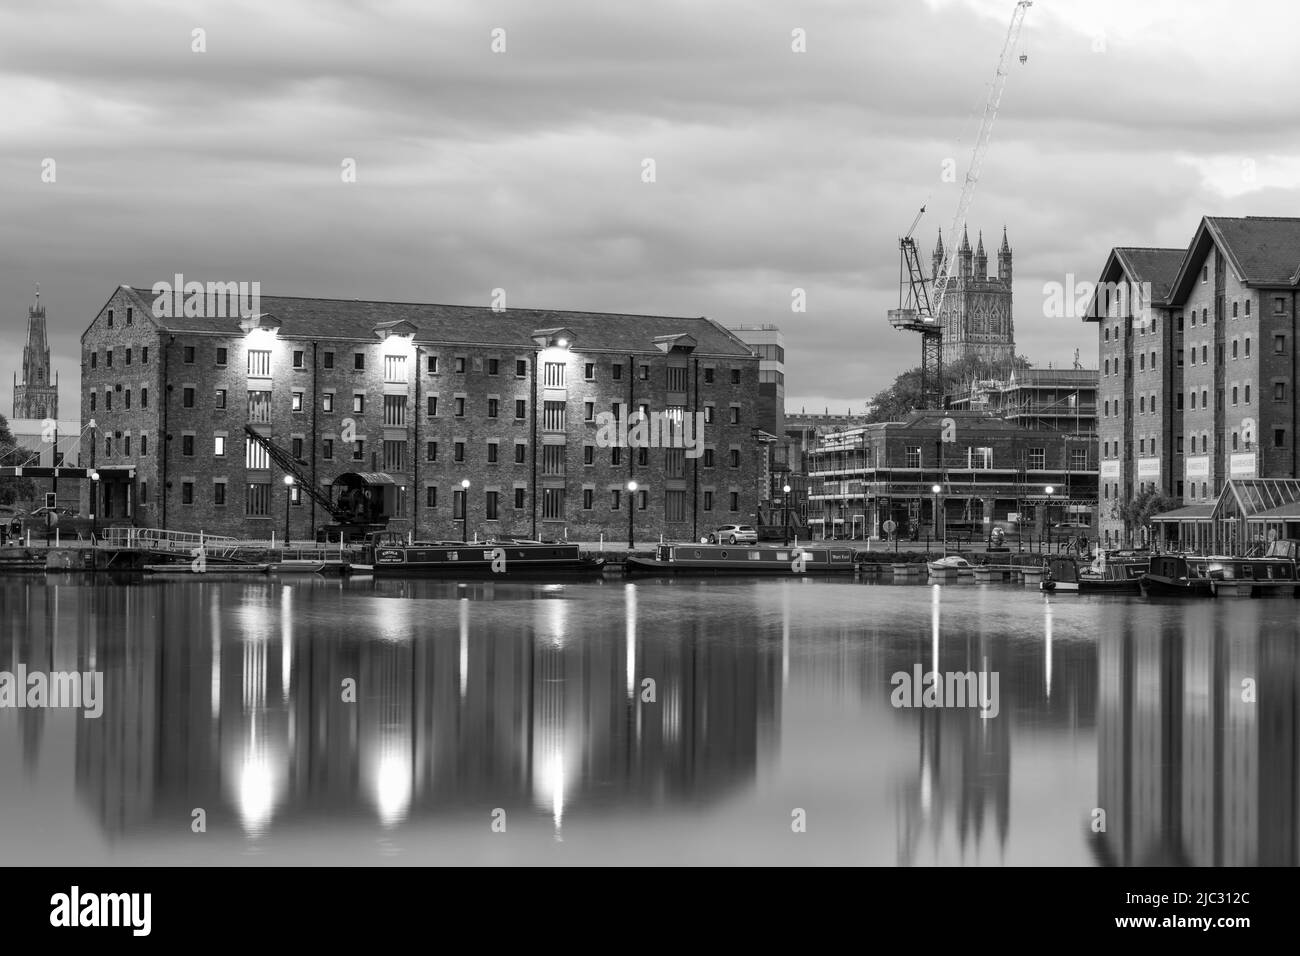 Gloucester quay Black and White Stock Photos & Images - Alamy